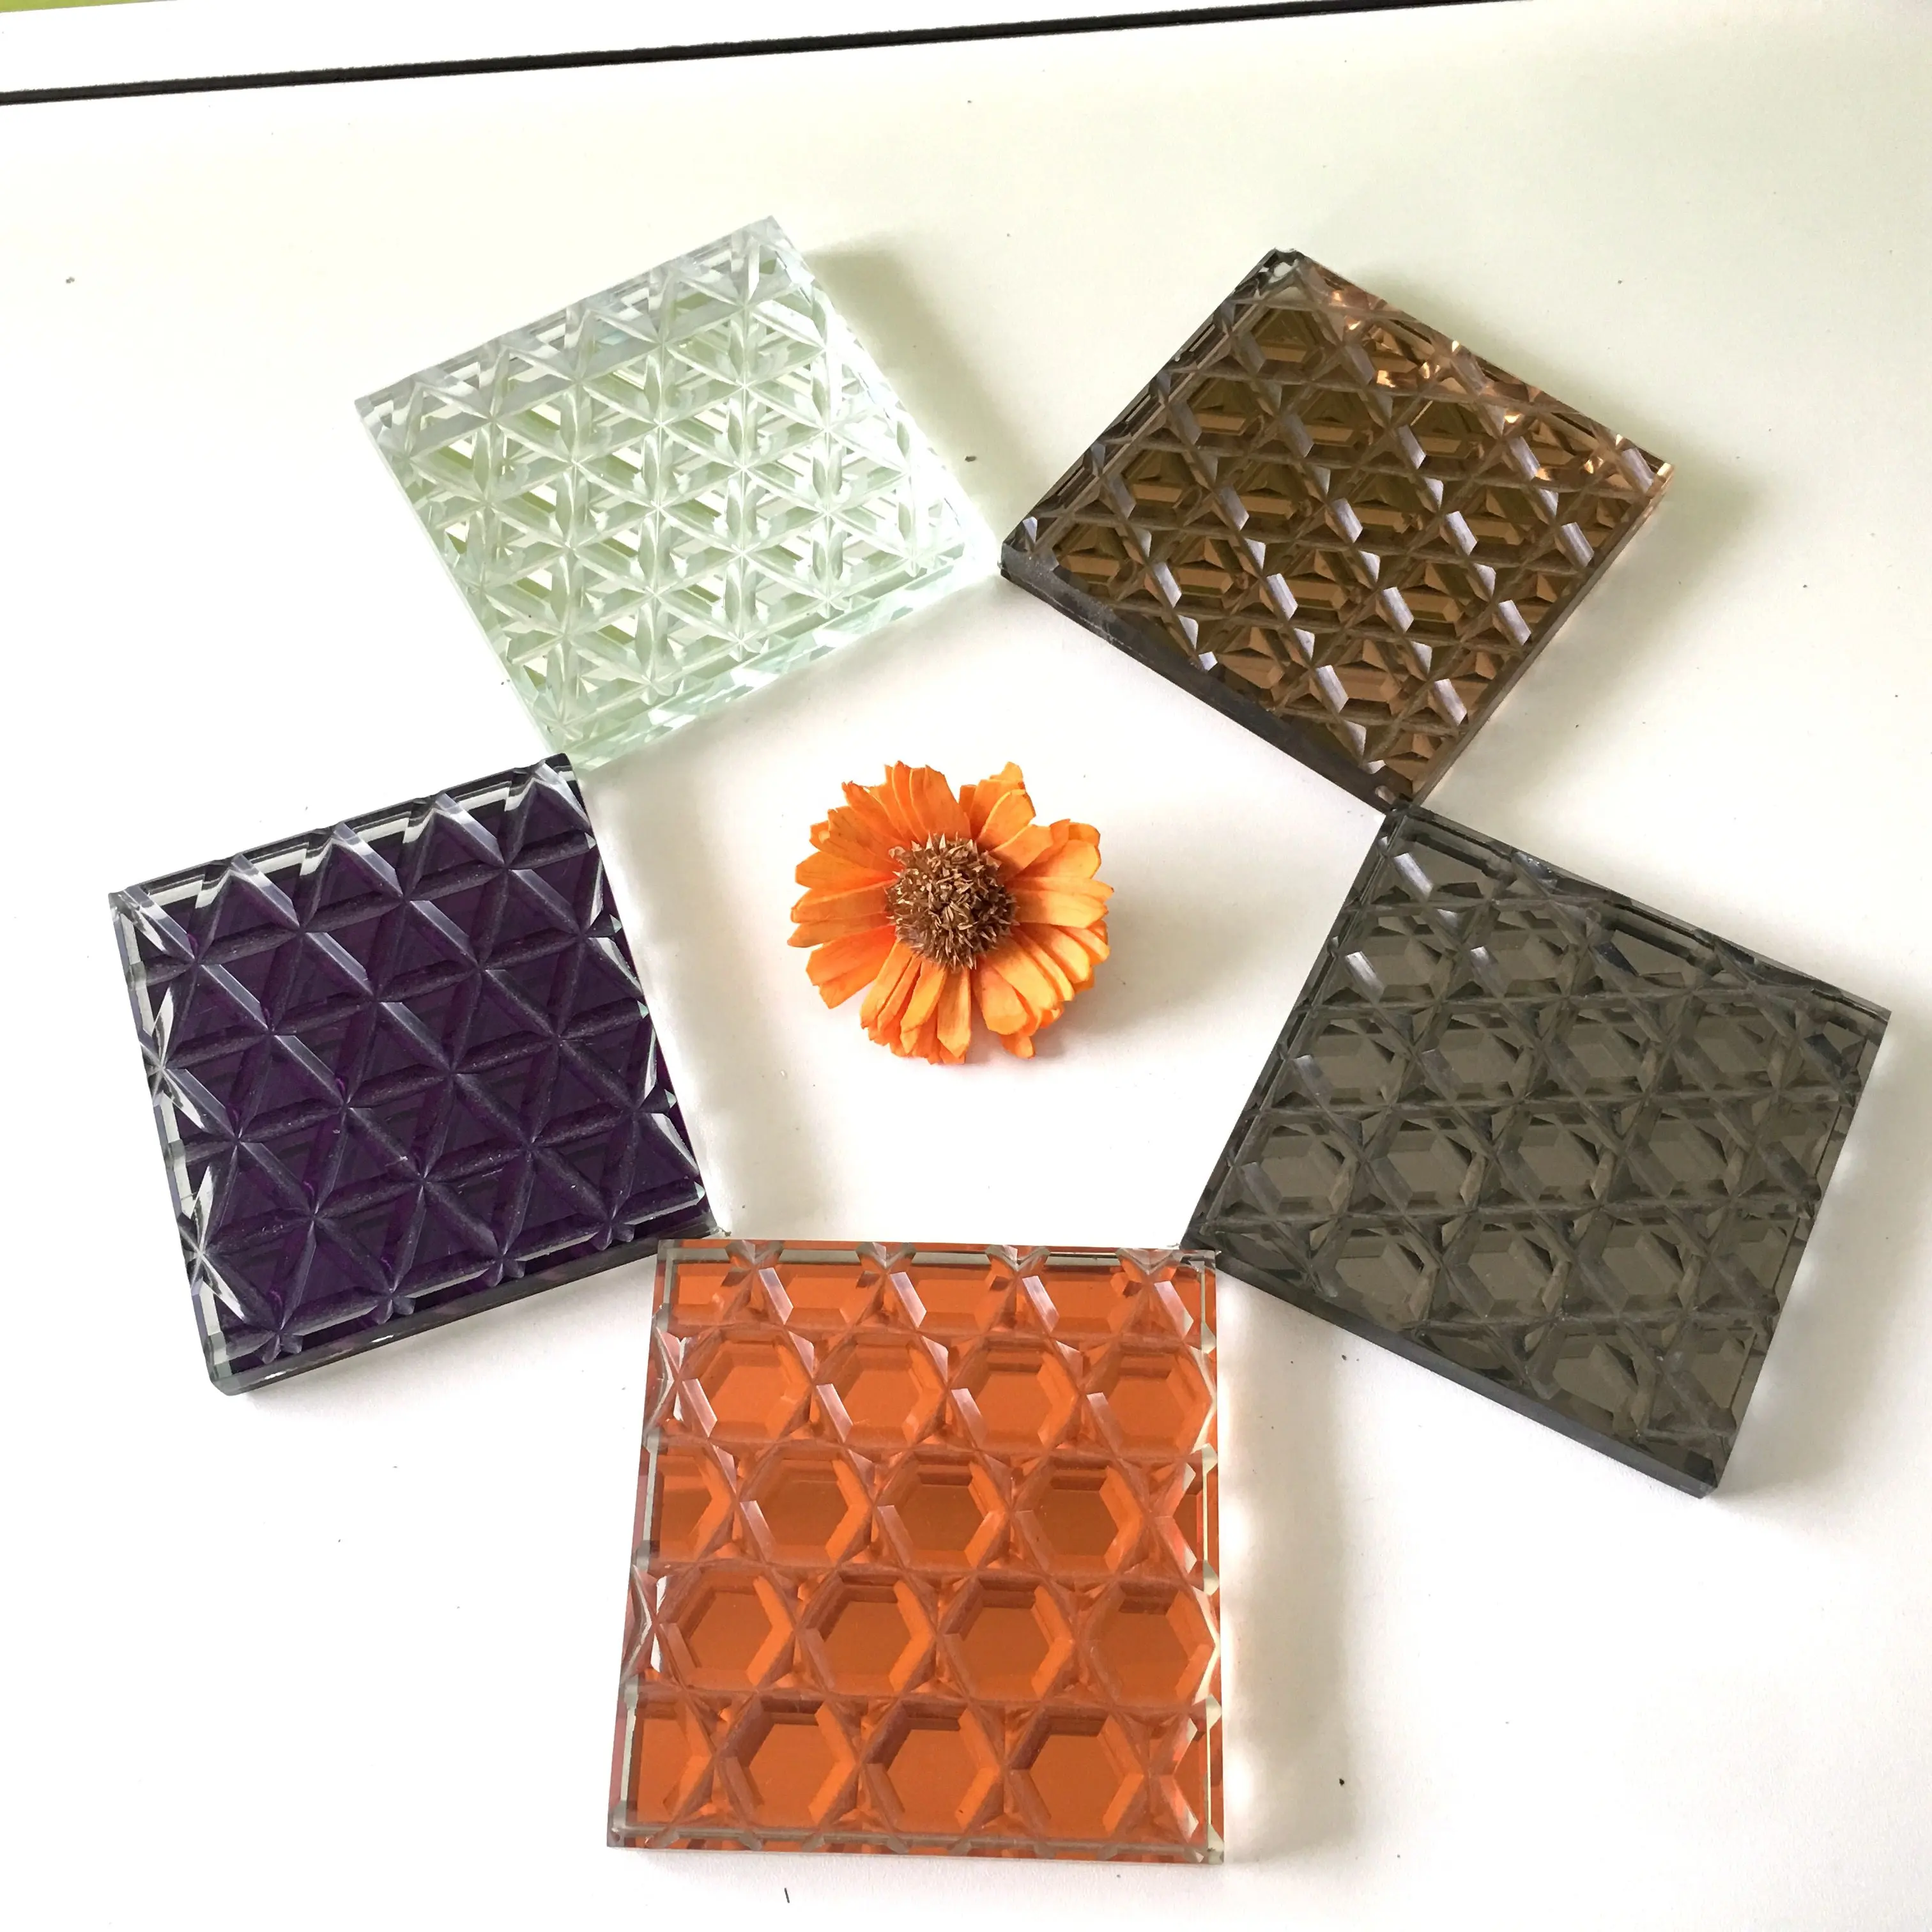 China Suppliers manufacture professional colored patterned glass wholesale price